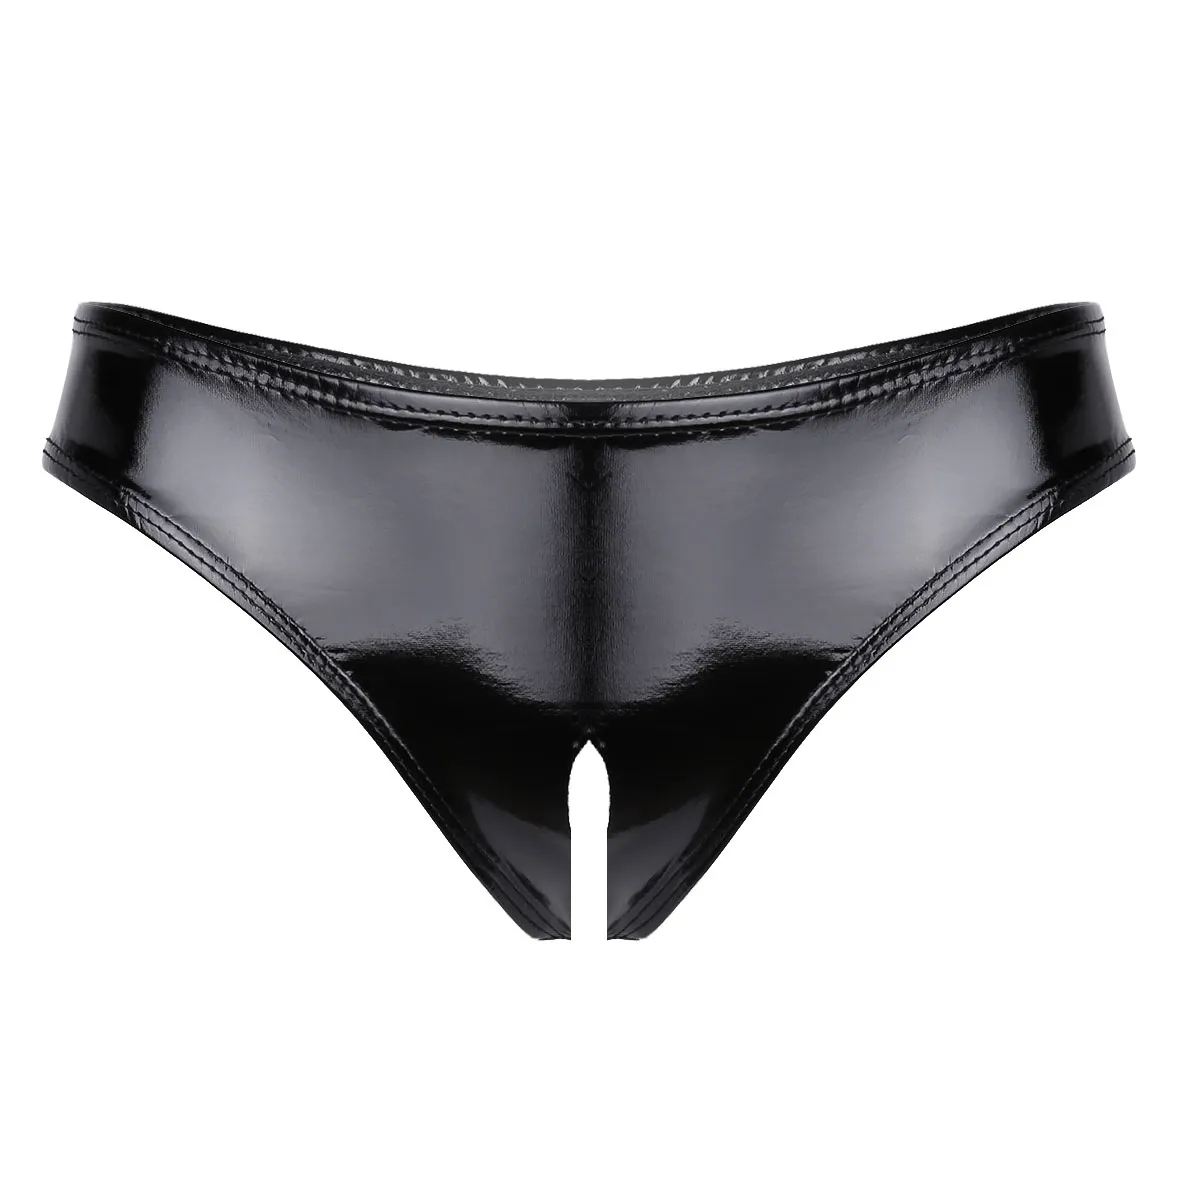 Sexy Black Patent Leather Latex Briefs With Open Crotch And Open